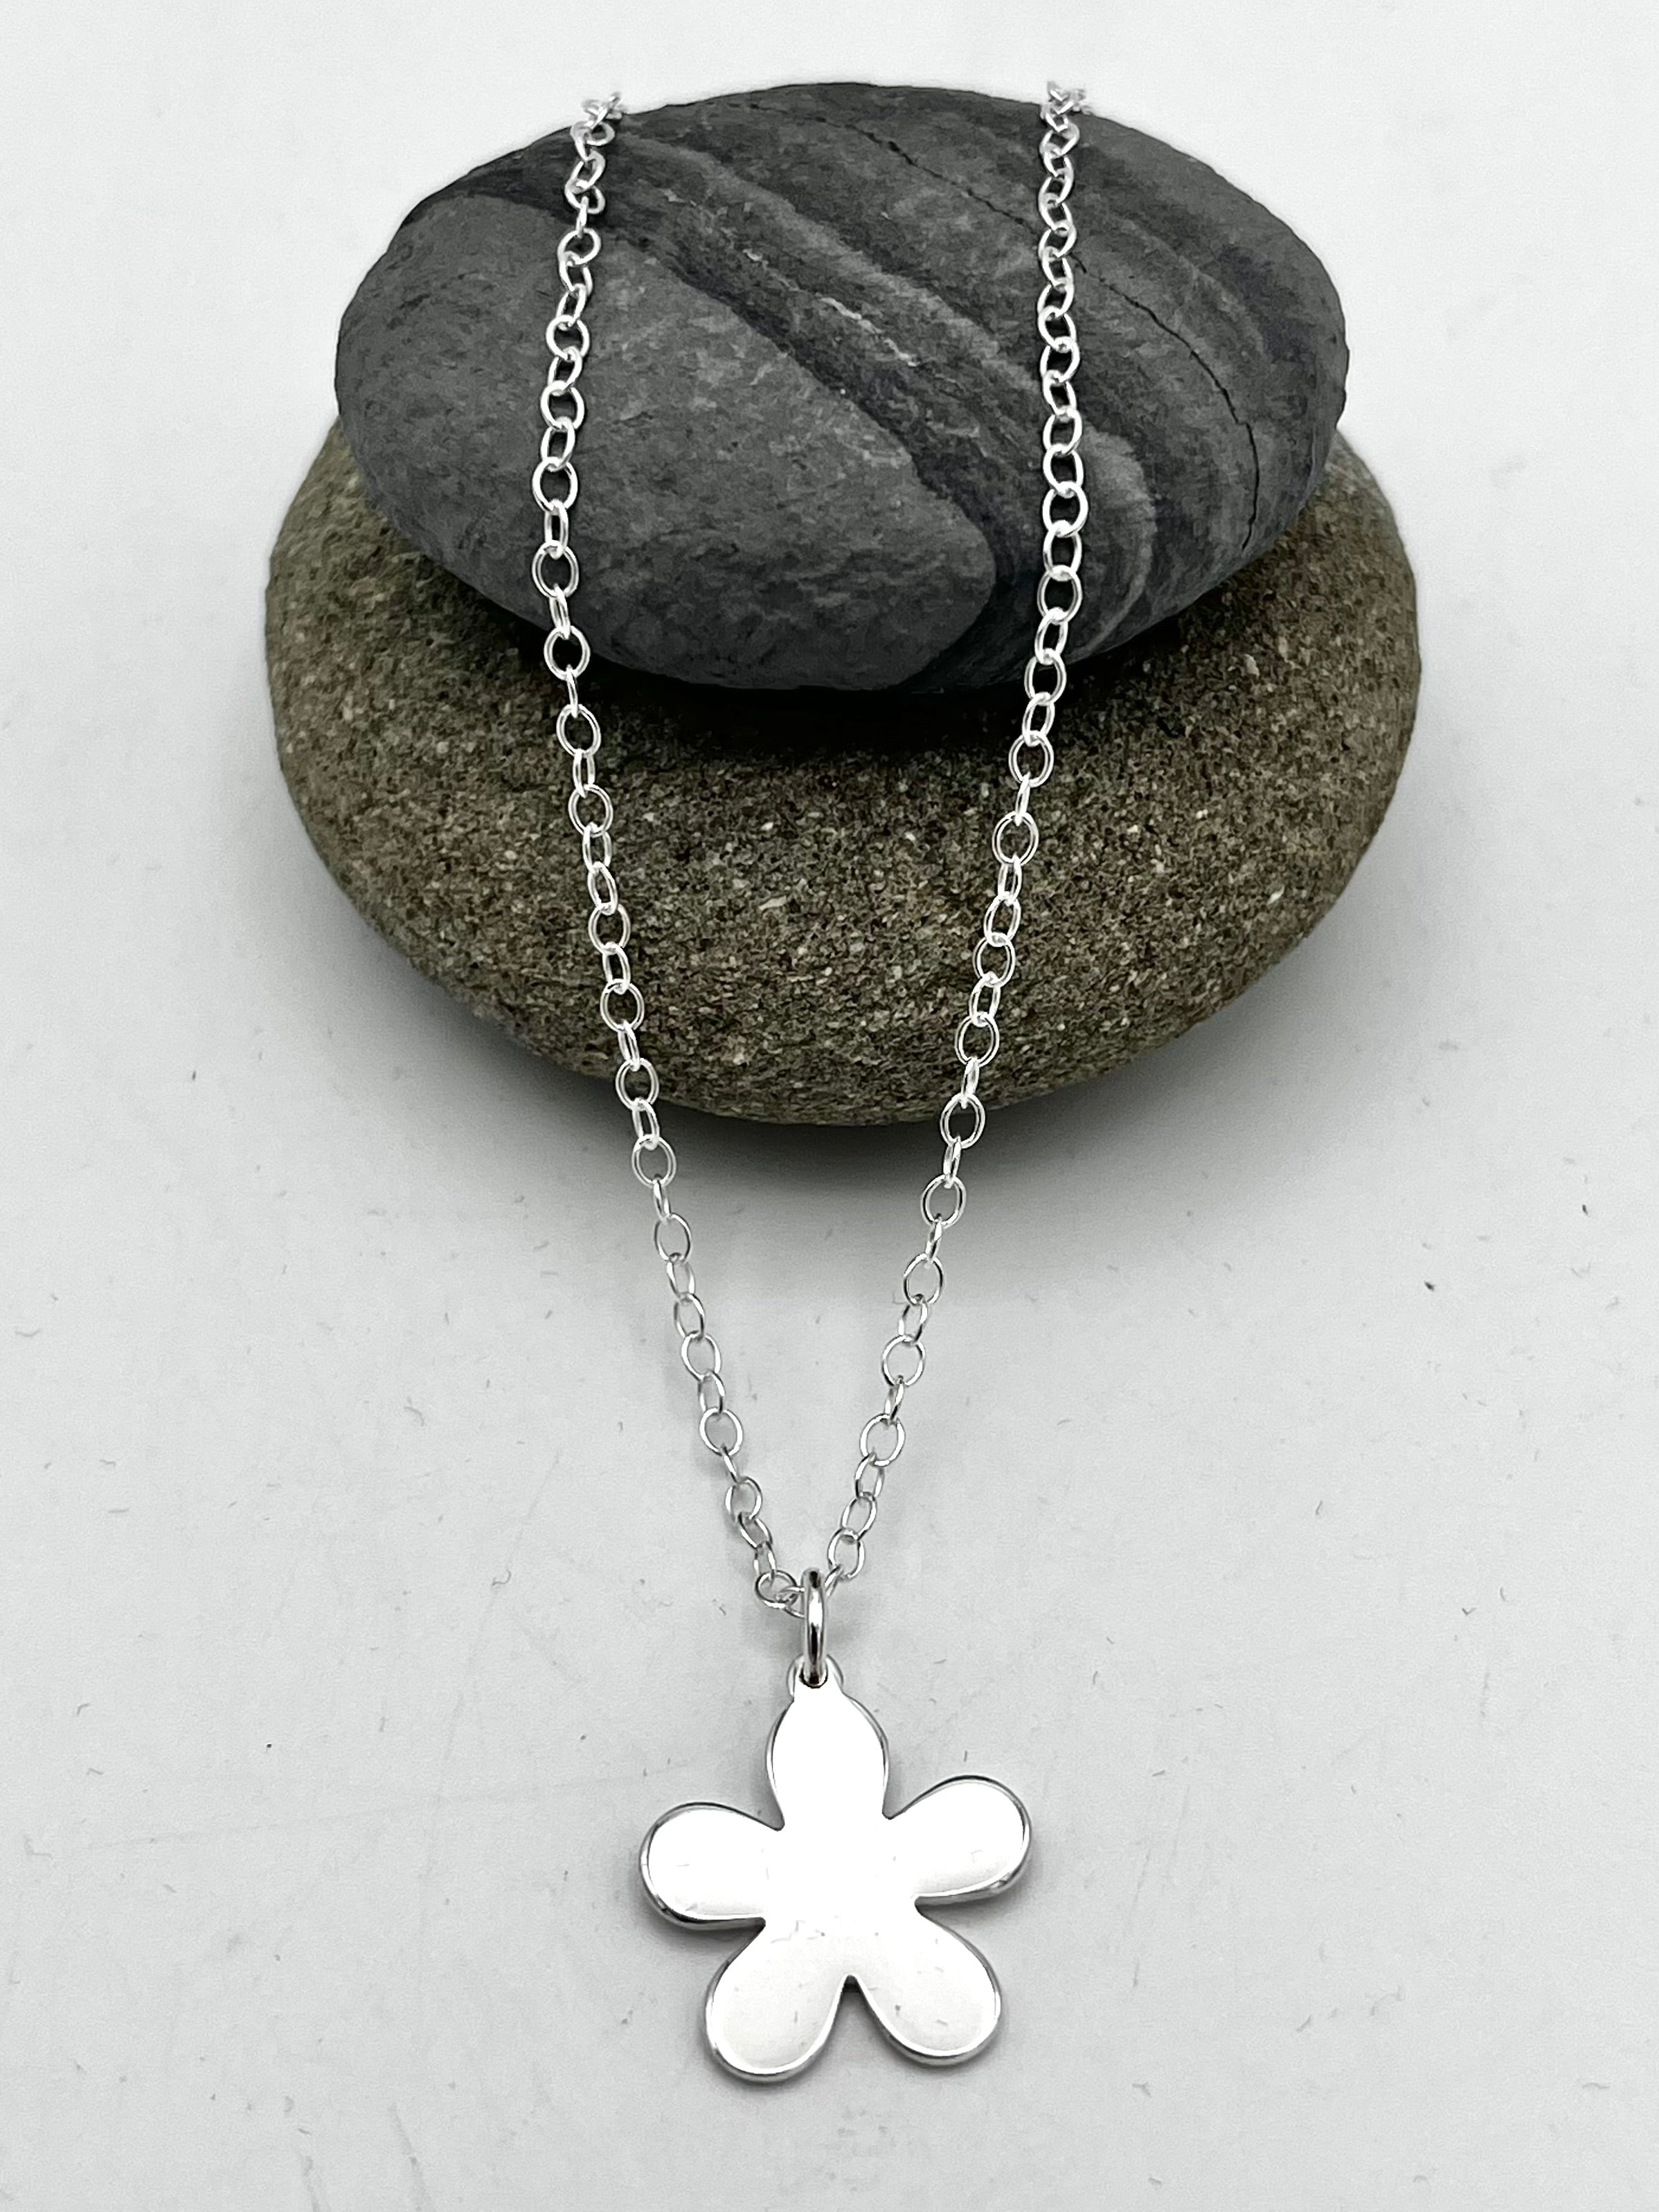 Single flower pendant 15mm wide polished finish on 16mm trace chain